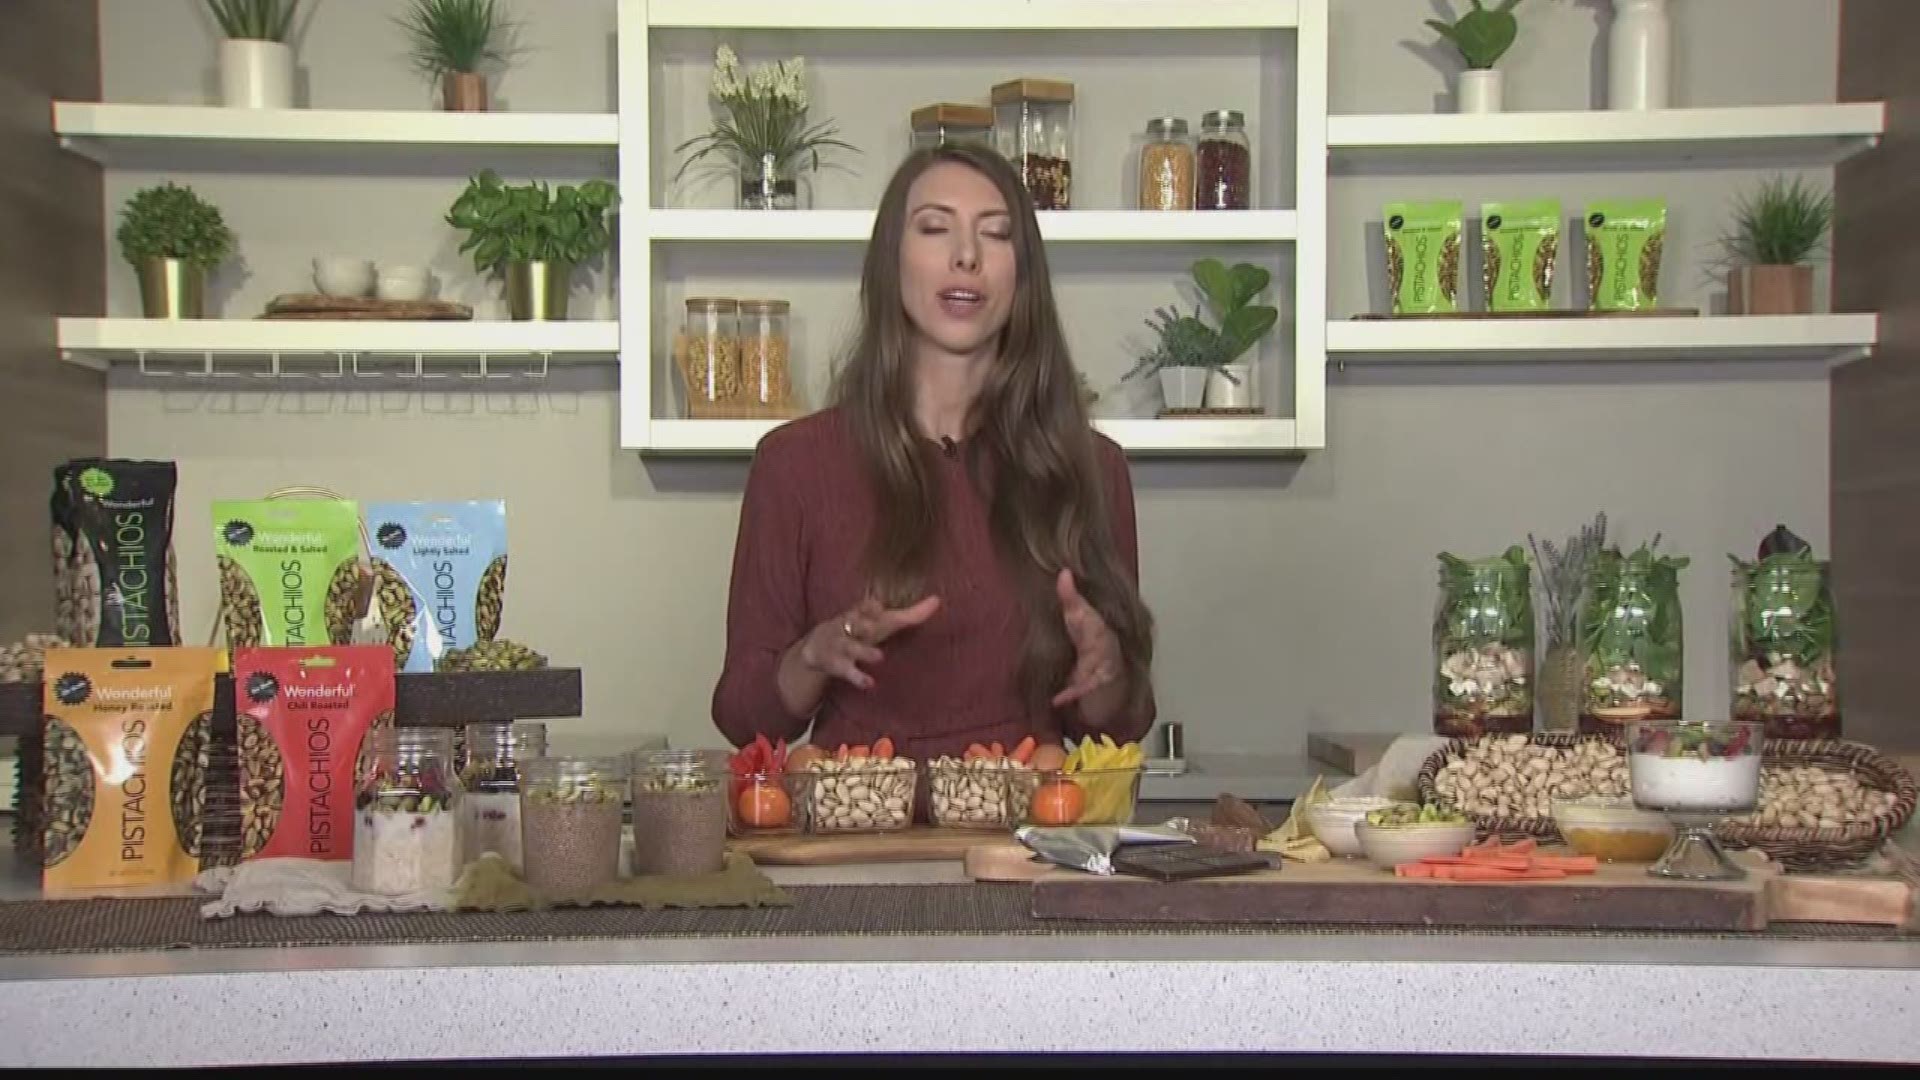 A nutrition expert shares some advice for creating healthy eating habits.